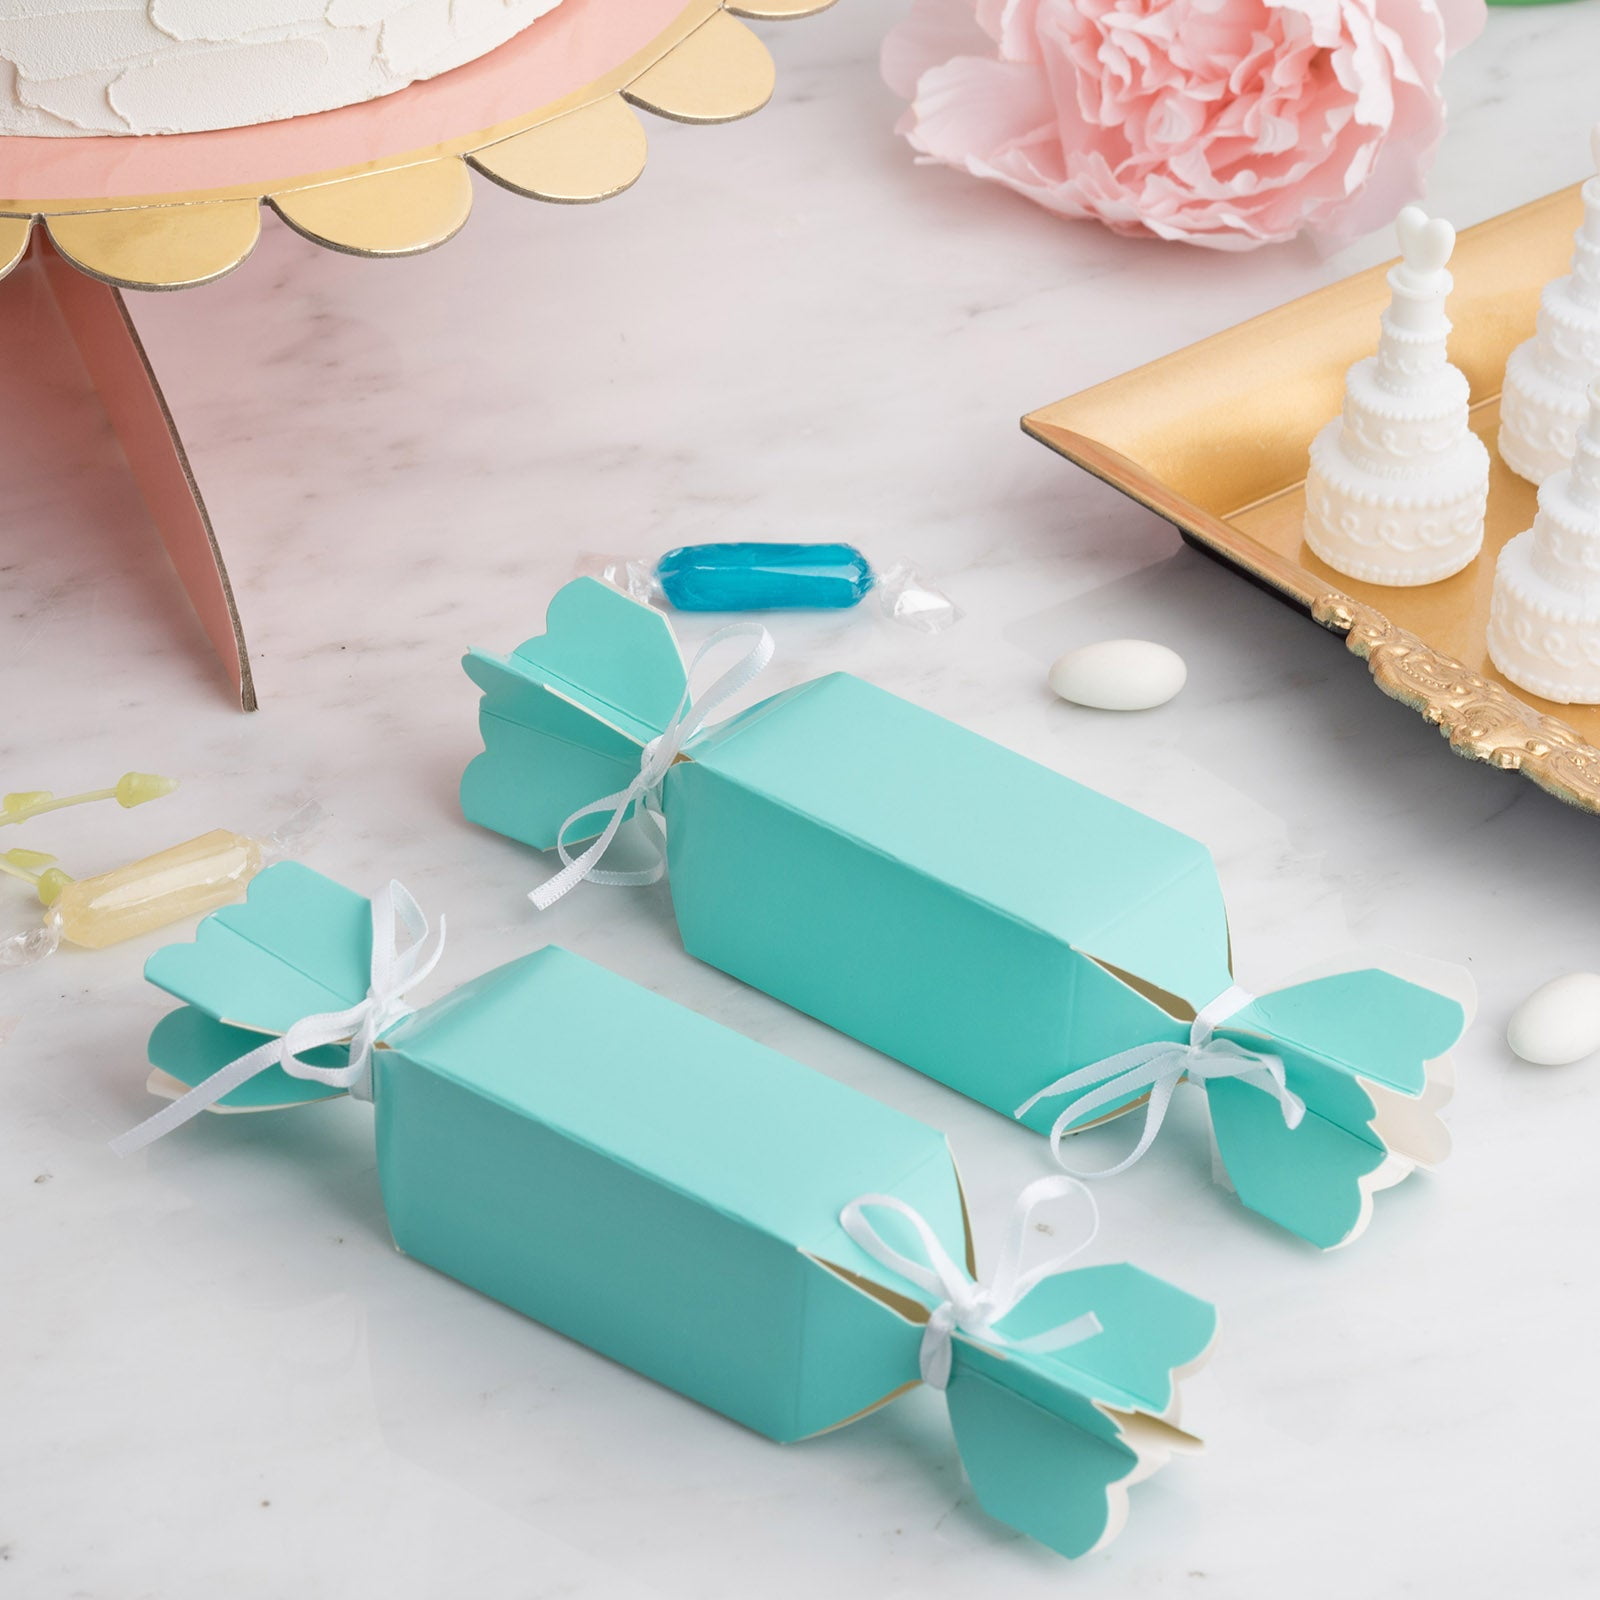 Turquoise Gift Boxes - with Lids and Bases - Box and Wrap